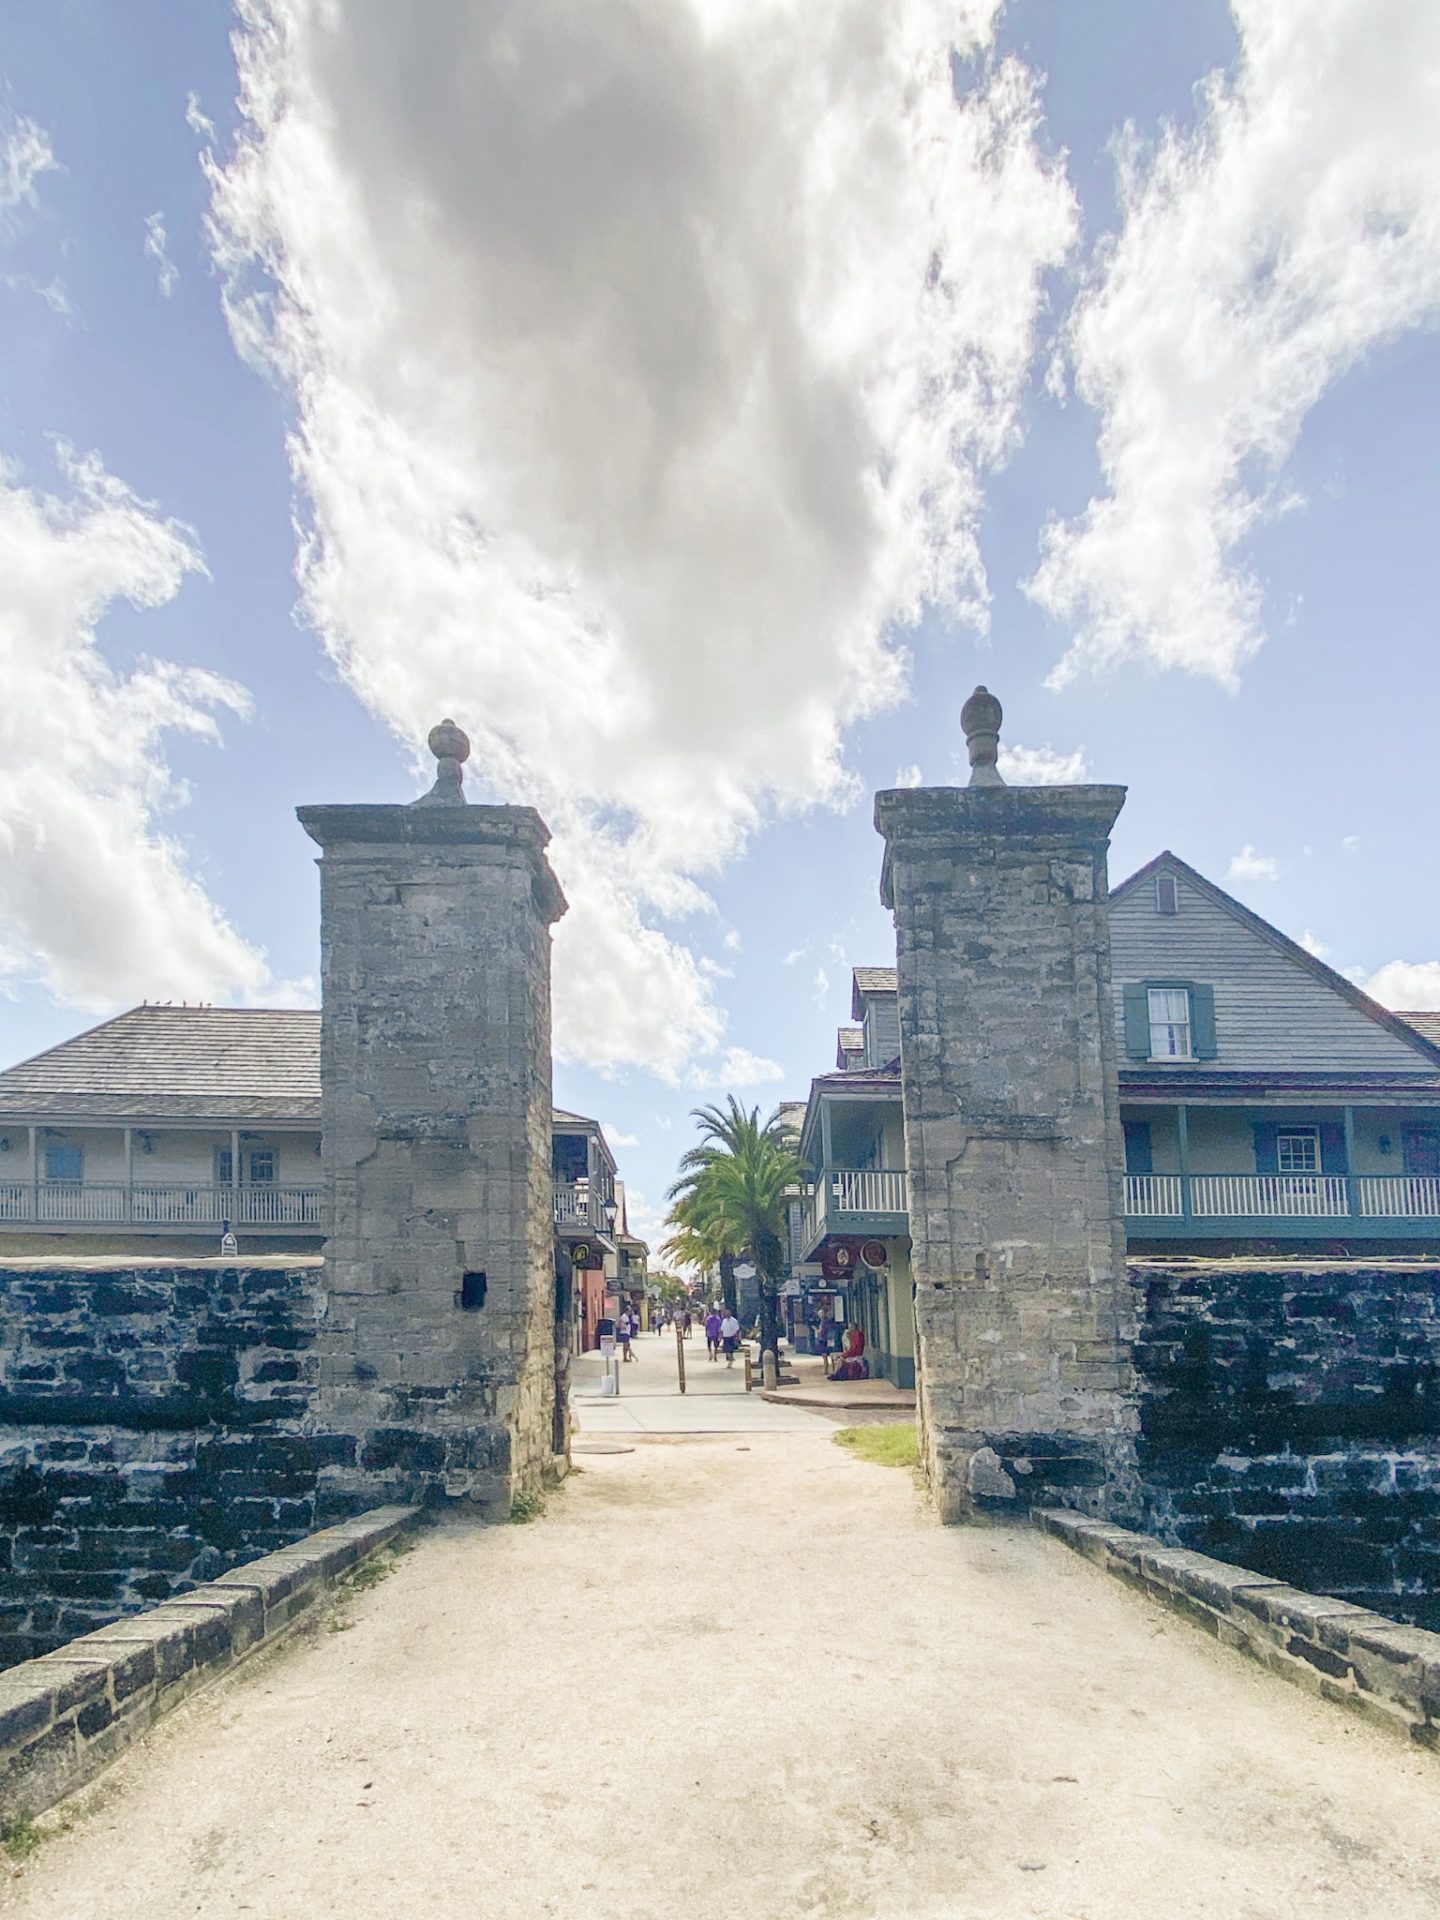 st augustine old city gates, old stone structure